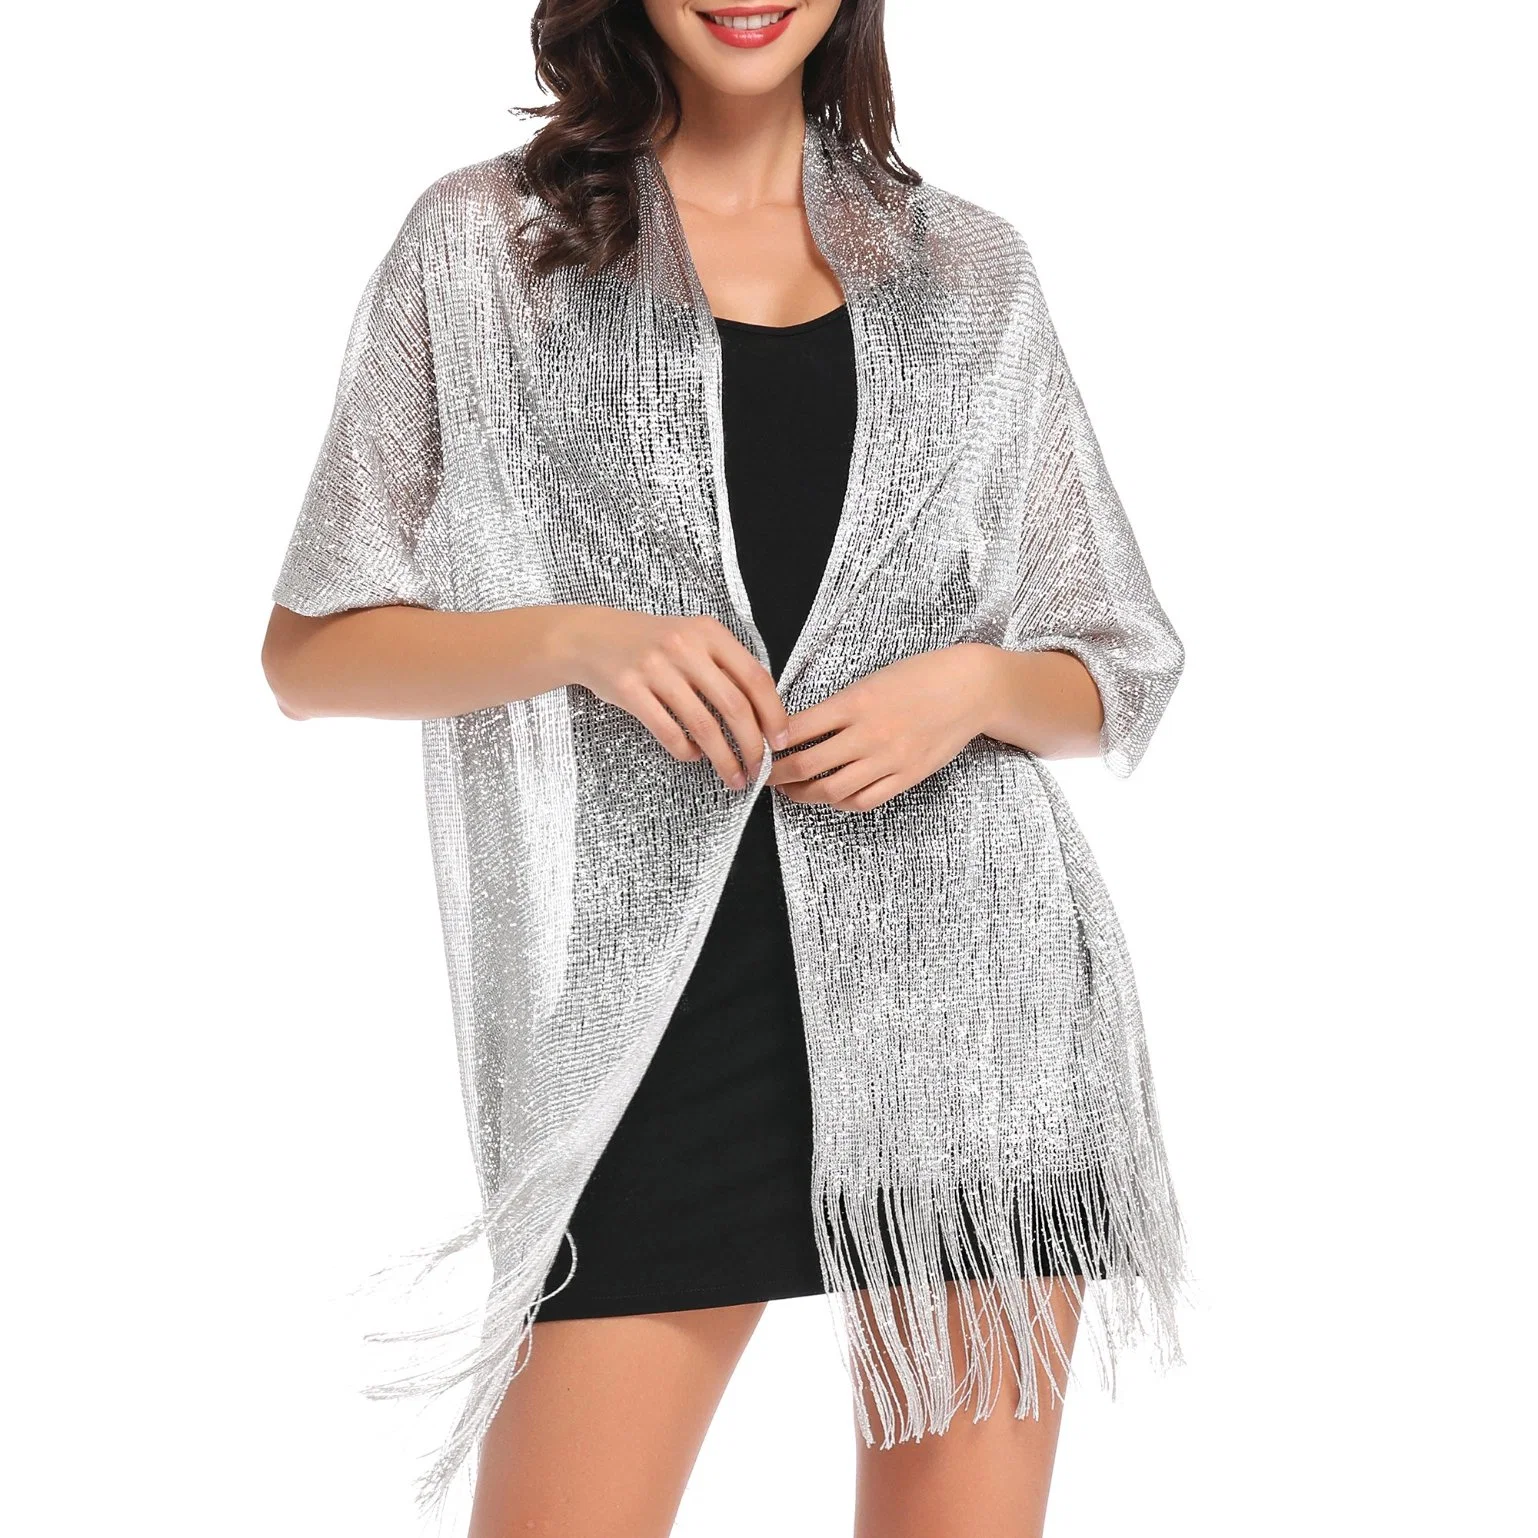 Glittering Sliver Grey Metallic Shawl Scarf and Wraps for Evening Patry Dresses